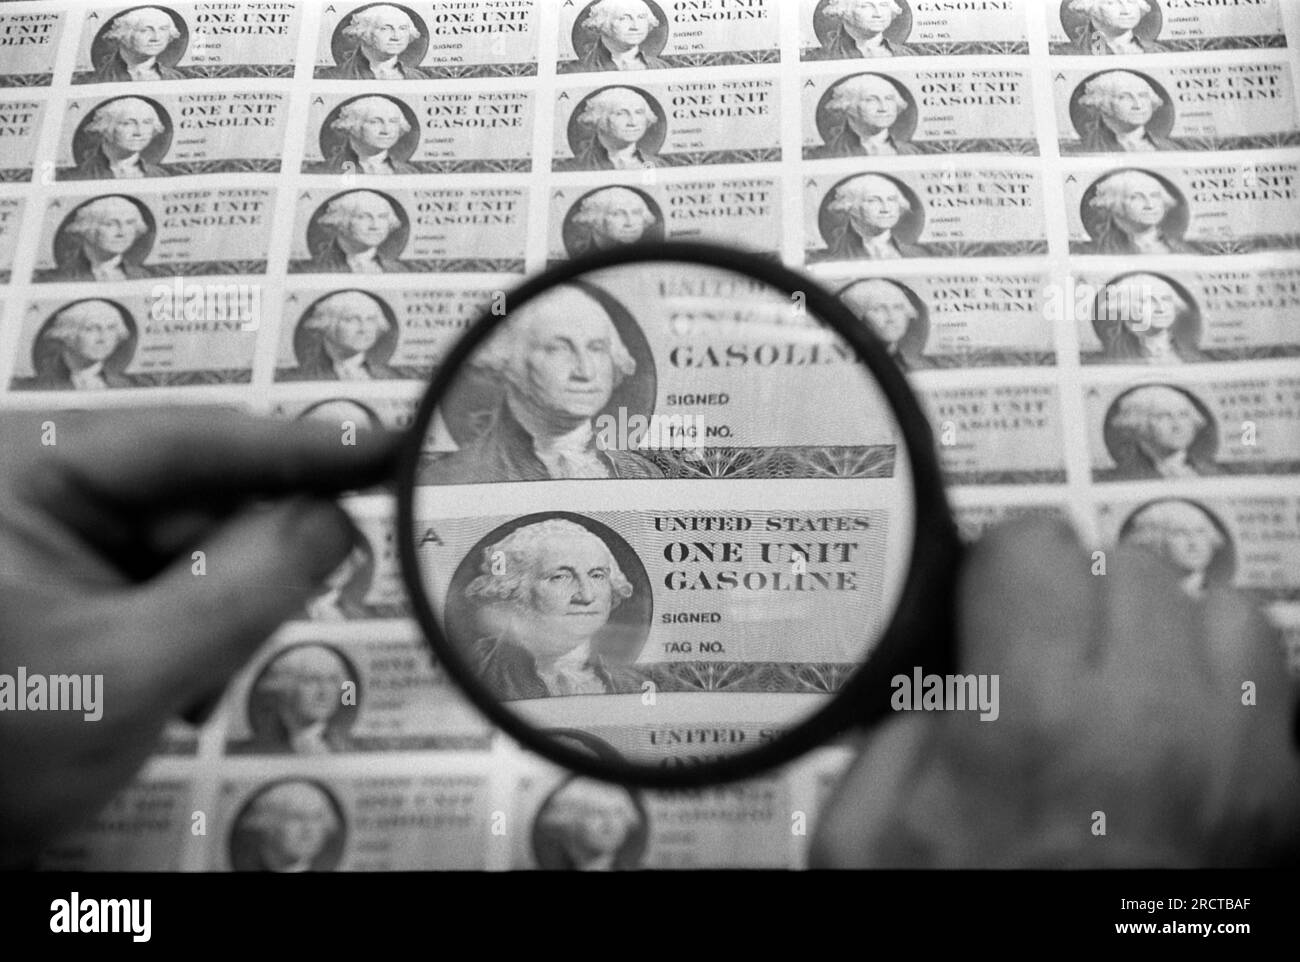 Washington, D.C.:  January 31, 1974 Gas ration stamps being printed and inspected with a magnifying glass at the Bureau of Engraving & Printing . Stock Photo